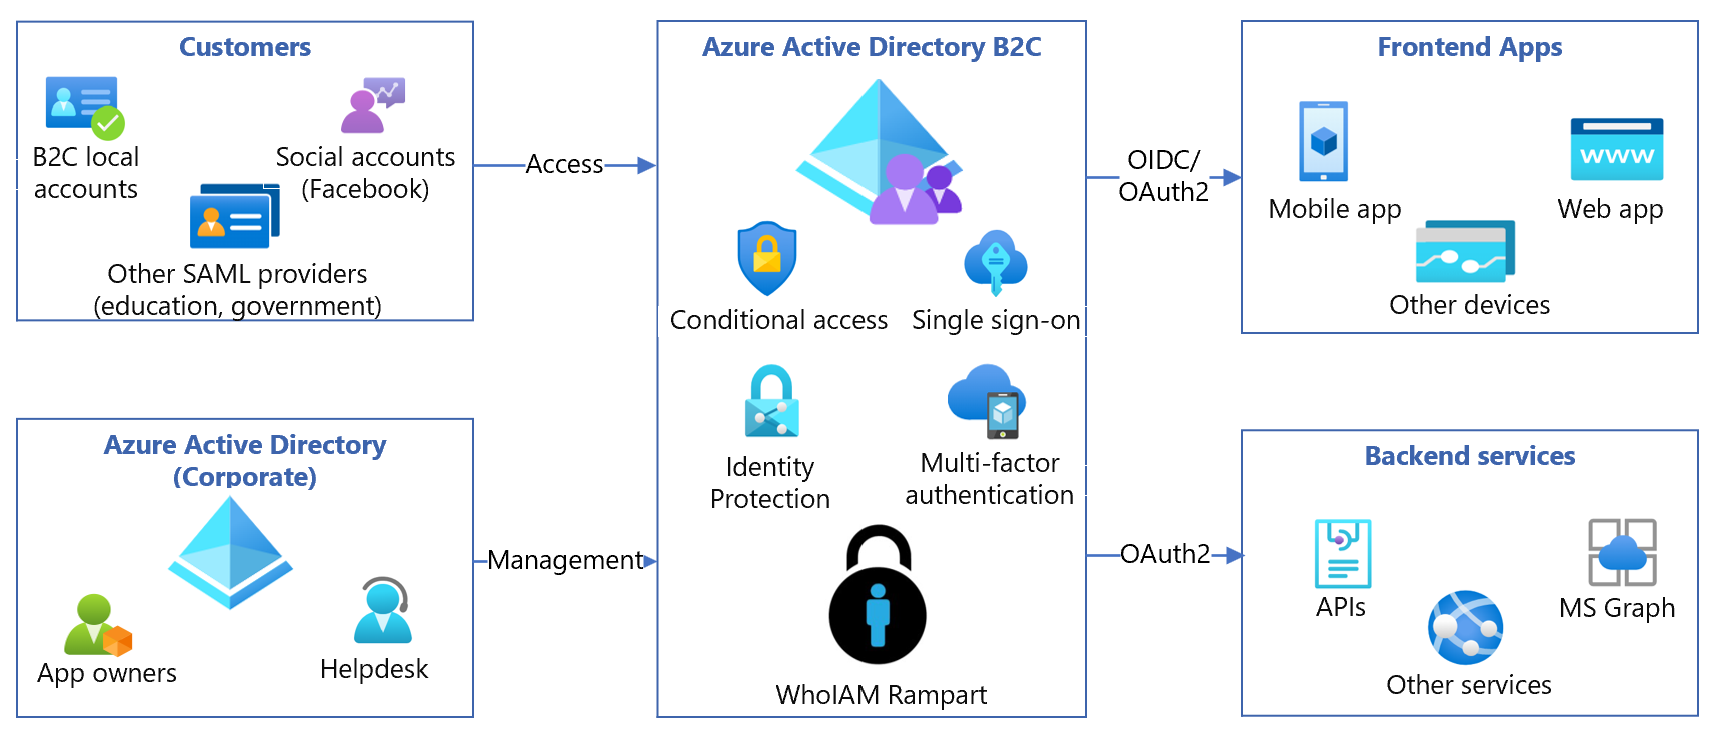 Diagram of the WhoIAM Rampart integration for Azure AD B2C.